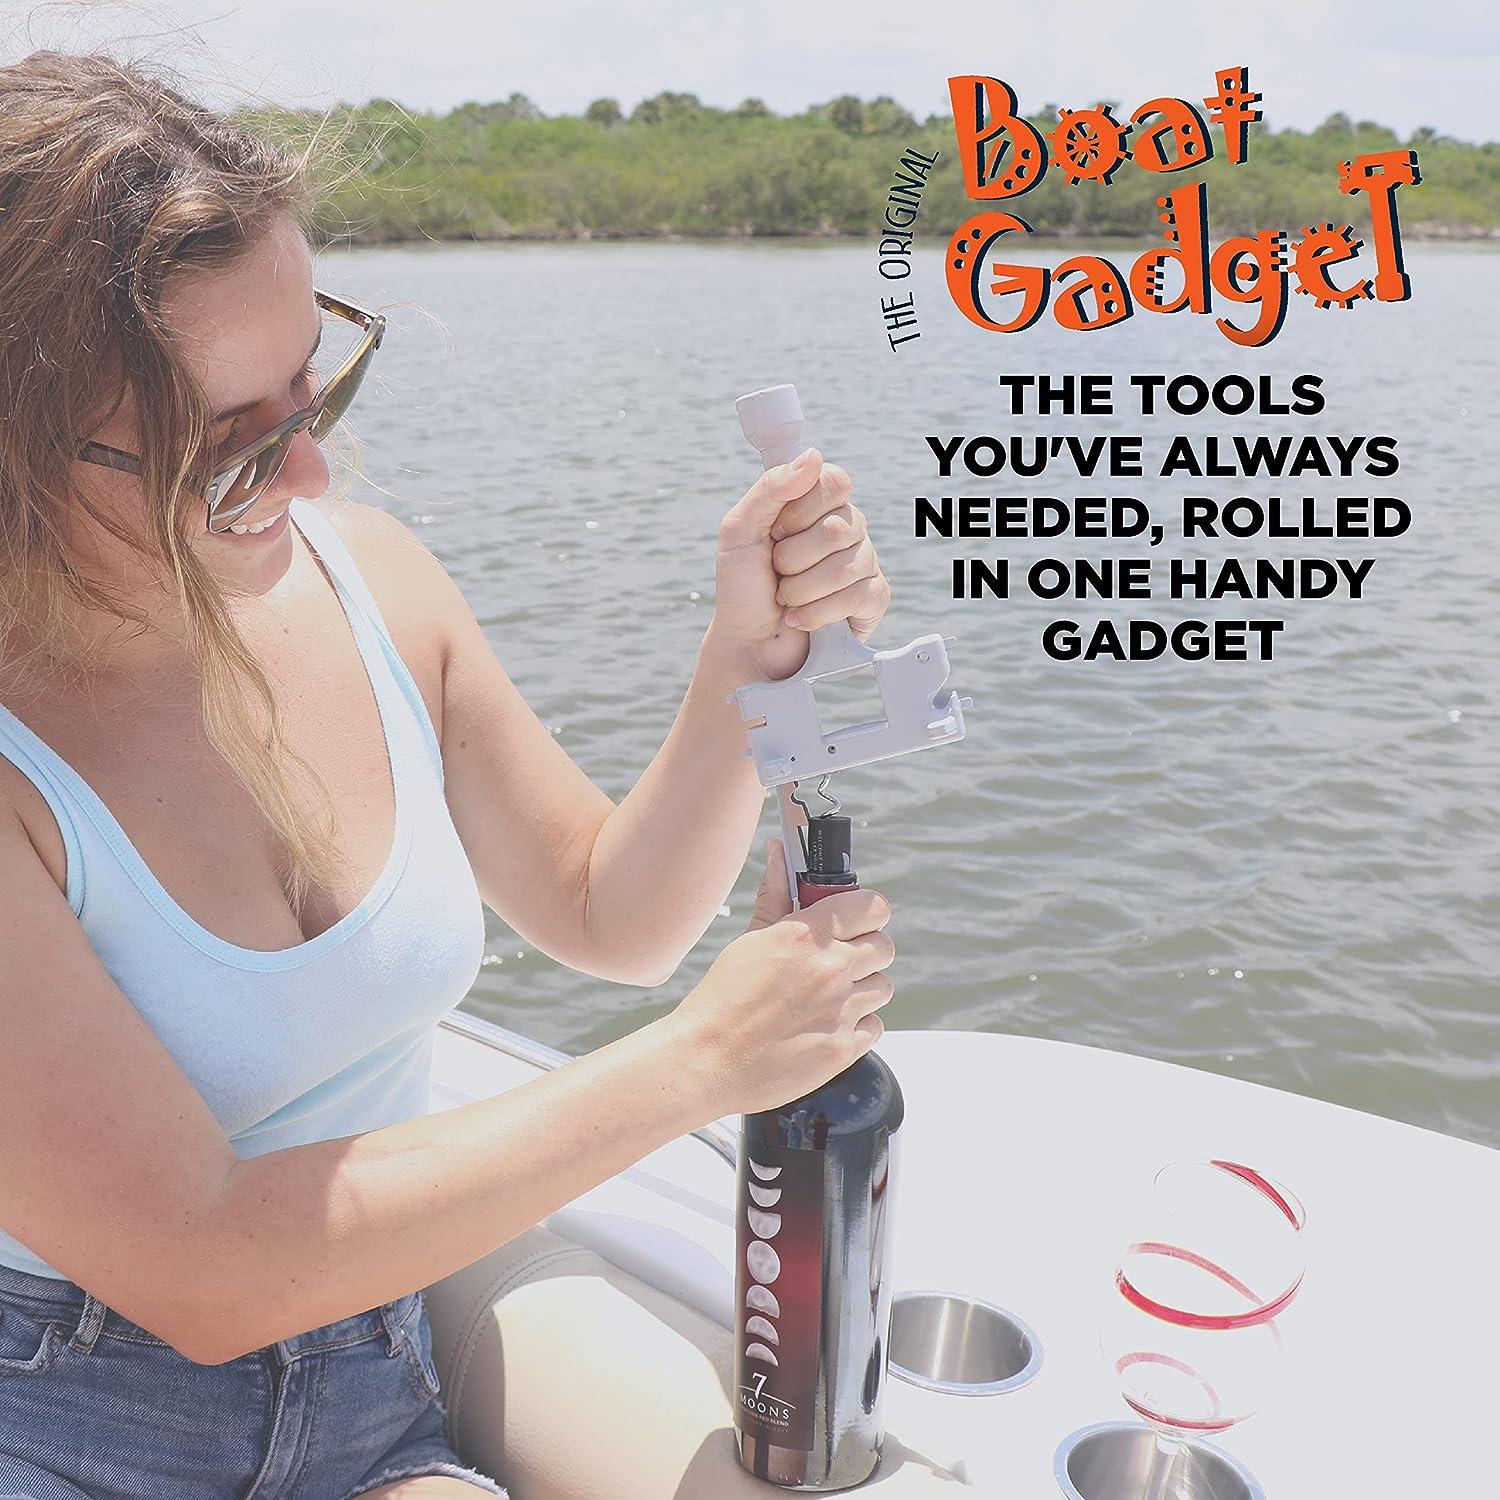 Boat Gadget This 10-in-1 Boat Tool Includes Beer and Wine Bottle Opener,  Safety Whistle, Fishing Line Cutter, Marine Gas Cap Key and Other Essential  Tools Ideal Gifts for Boat Owners Orange